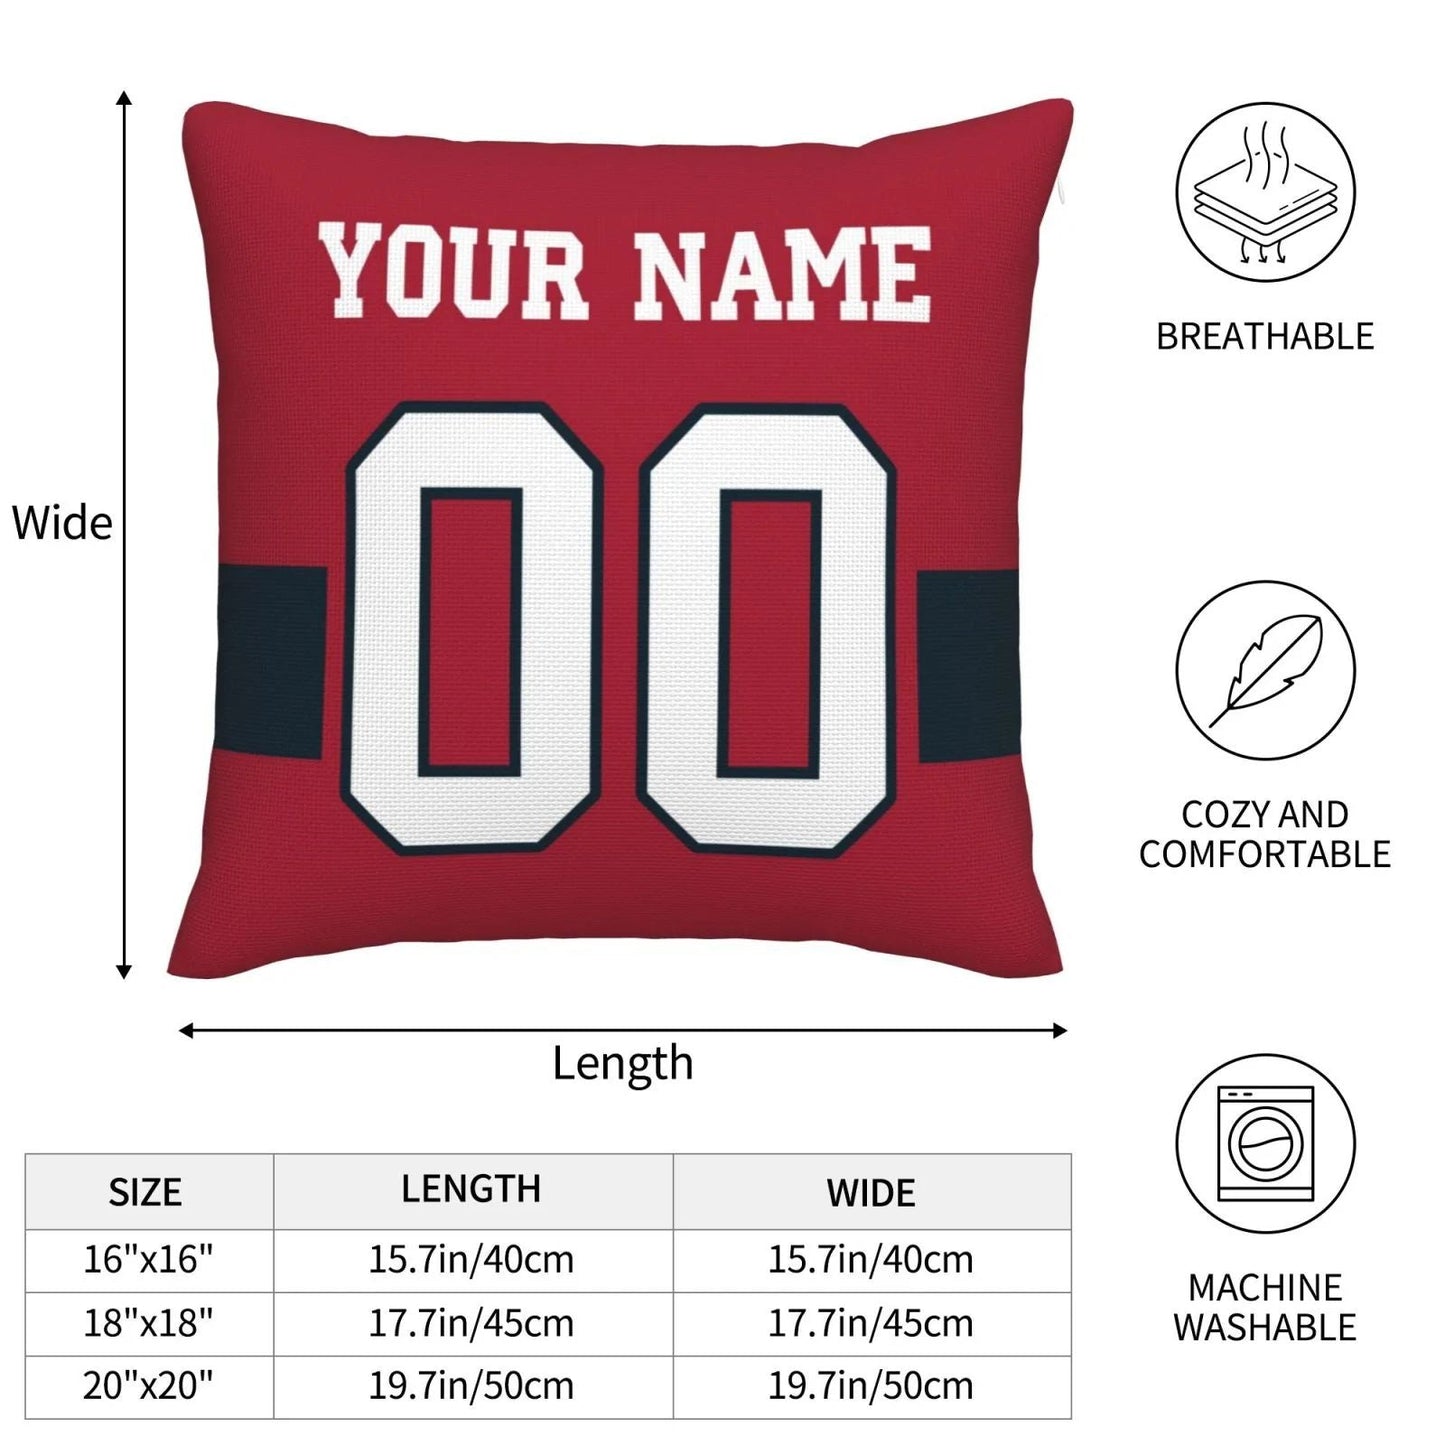 Custom H.Texans Pillow Decorative Throw Pillow Case - Print Personalized Football Team Fans Name & Number Birthday Gift Football Pillows